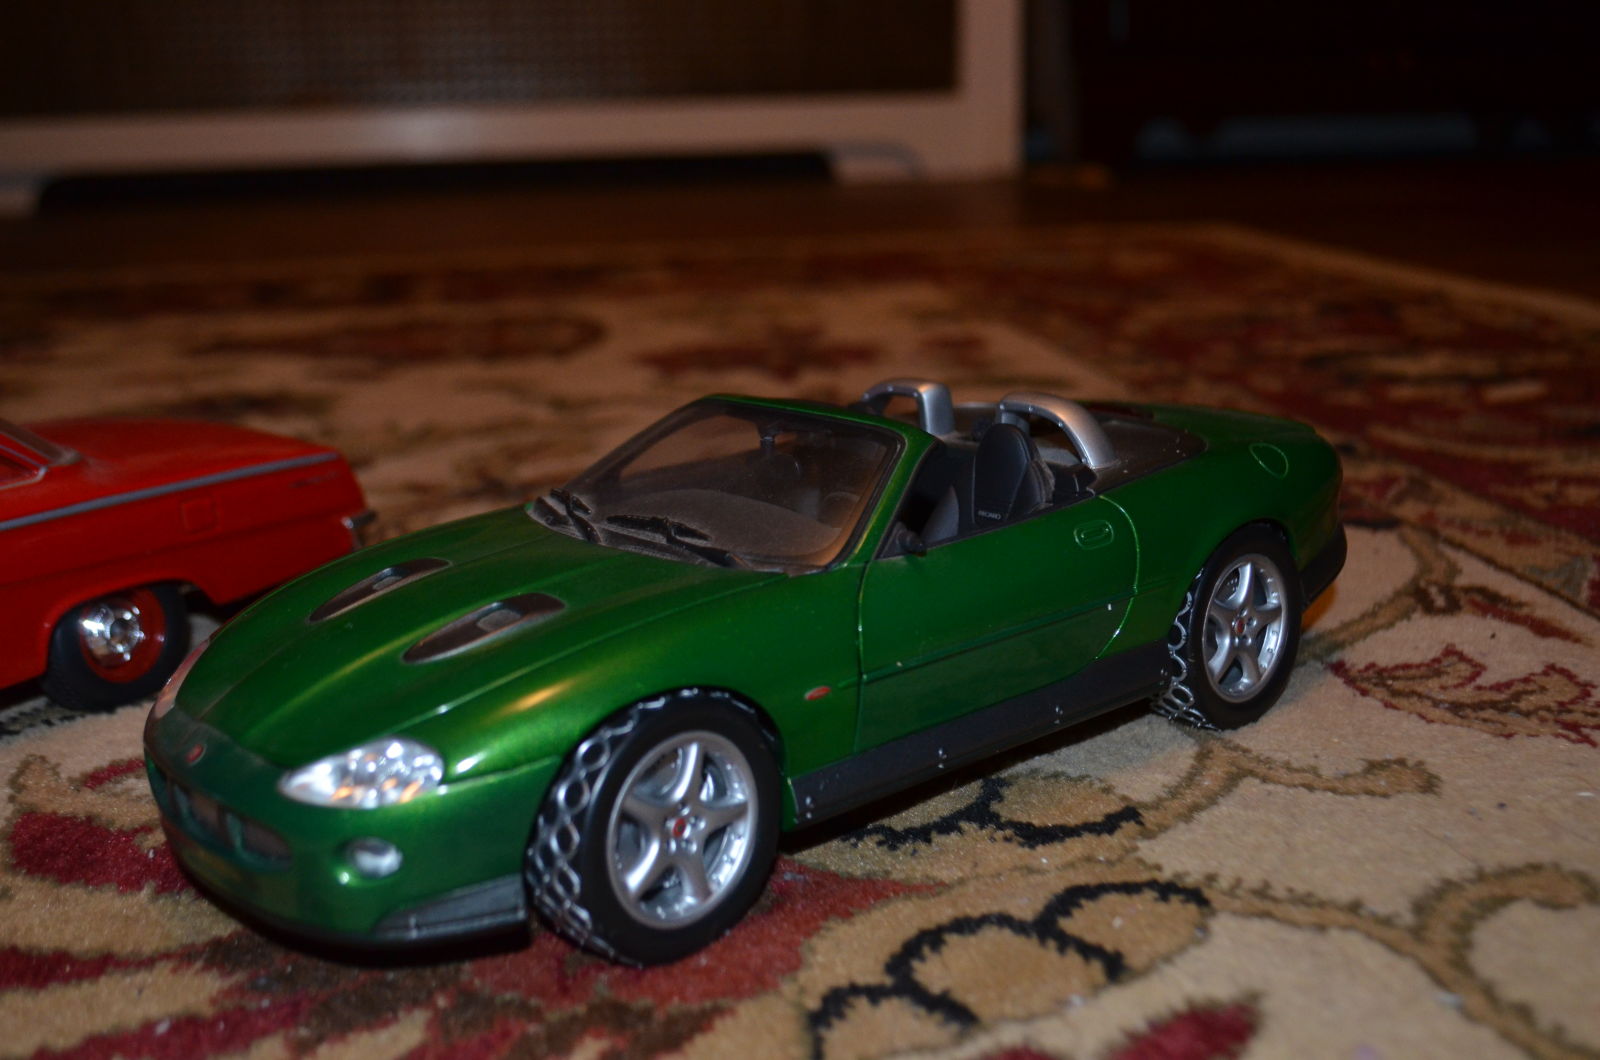  1/18 Jaguar from “Die Another Day”. mirrors broken off (one present), gatling gun cover is missing in pic, but I have it.  